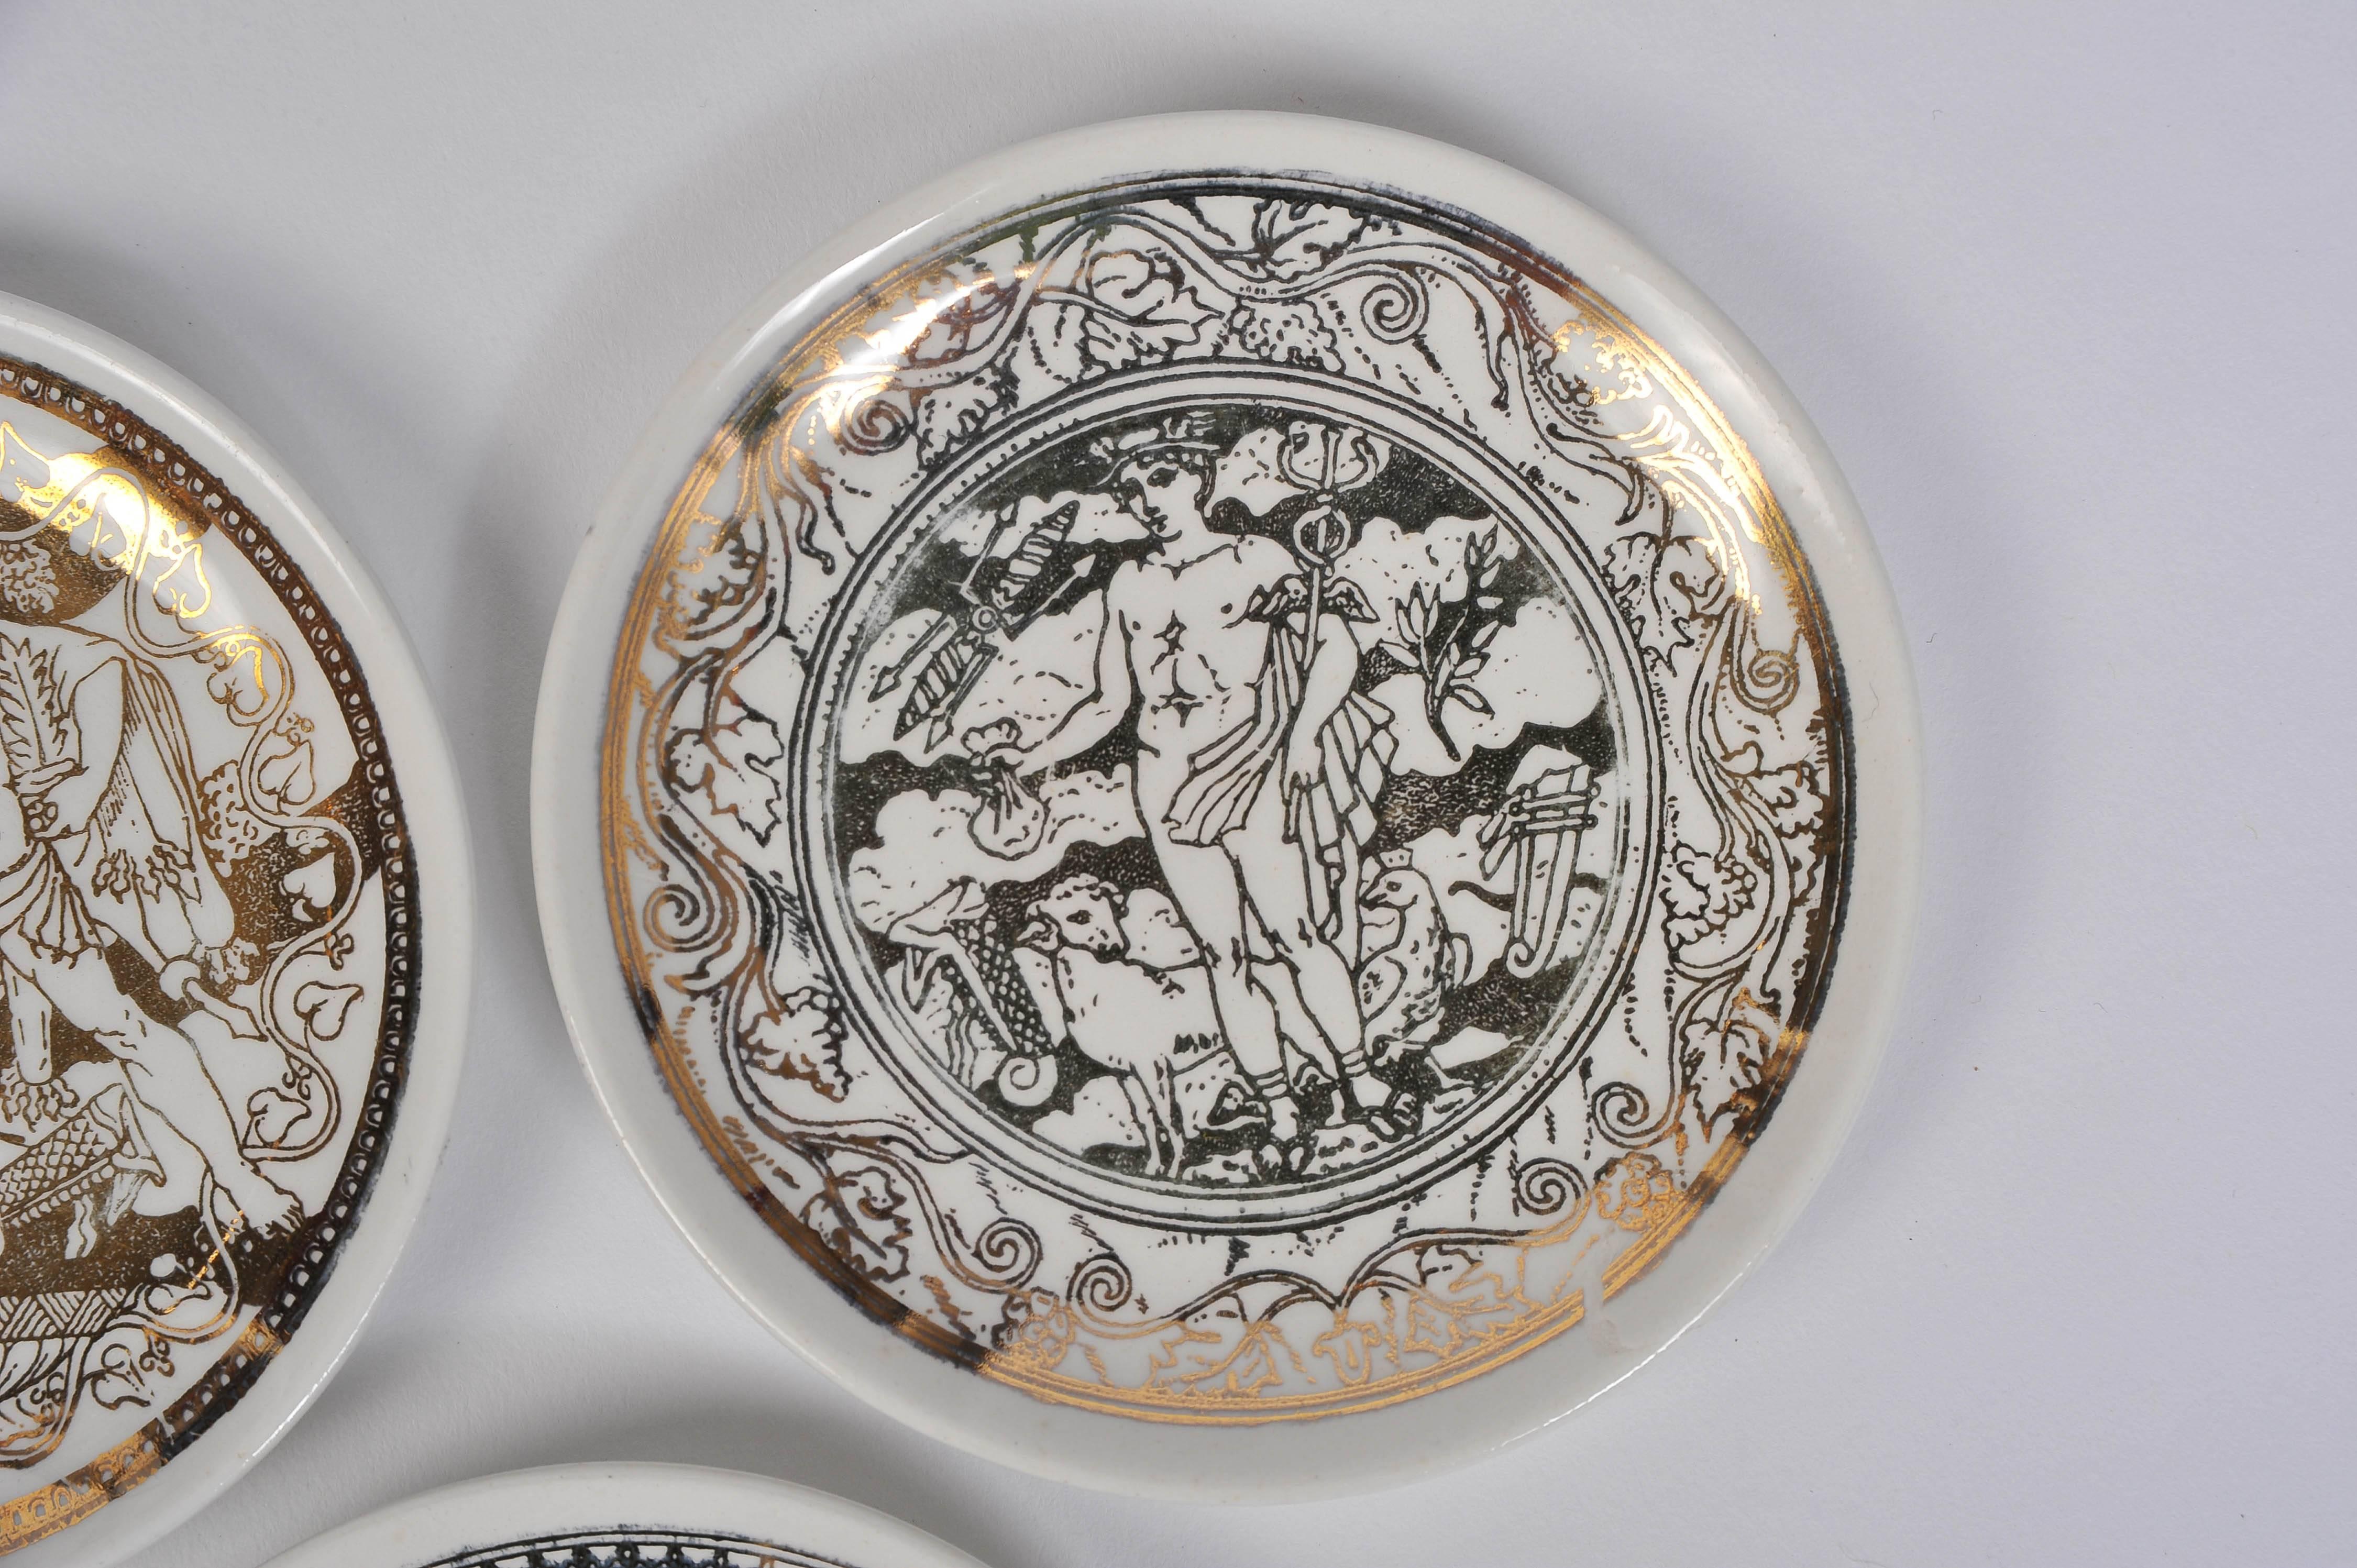 Set of Seven Small Plates by Piero Fornasetti 1